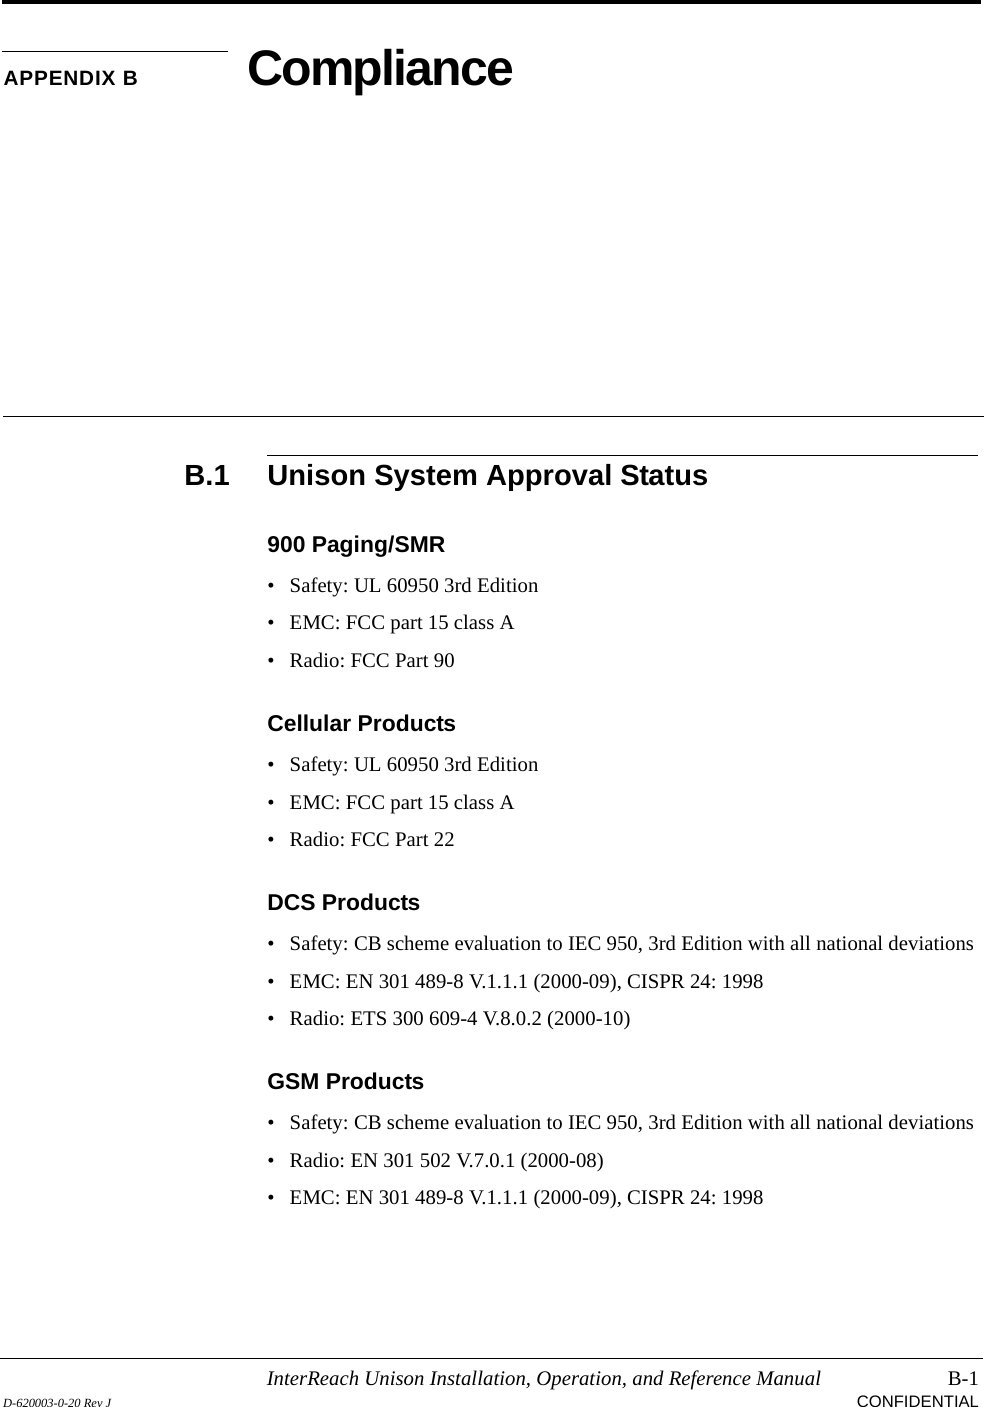 InterReach Unison Installation, Operation, and Reference Manual B-1D-620003-0-20 Rev J CONFIDENTIALAPPENDIX B ComplianceB.1 Unison System Approval Status900 Paging/SMR• Safety: UL 60950 3rd Edition• EMC: FCC part 15 class A• Radio: FCC Part 90Cellular Products• Safety: UL 60950 3rd Edition• EMC: FCC part 15 class A• Radio: FCC Part 22DCS Products• Safety: CB scheme evaluation to IEC 950, 3rd Edition with all national deviations• EMC: EN 301 489-8 V.1.1.1 (2000-09), CISPR 24: 1998• Radio: ETS 300 609-4 V.8.0.2 (2000-10)GSM Products• Safety: CB scheme evaluation to IEC 950, 3rd Edition with all national deviations• Radio: EN 301 502 V.7.0.1 (2000-08)• EMC: EN 301 489-8 V.1.1.1 (2000-09), CISPR 24: 1998